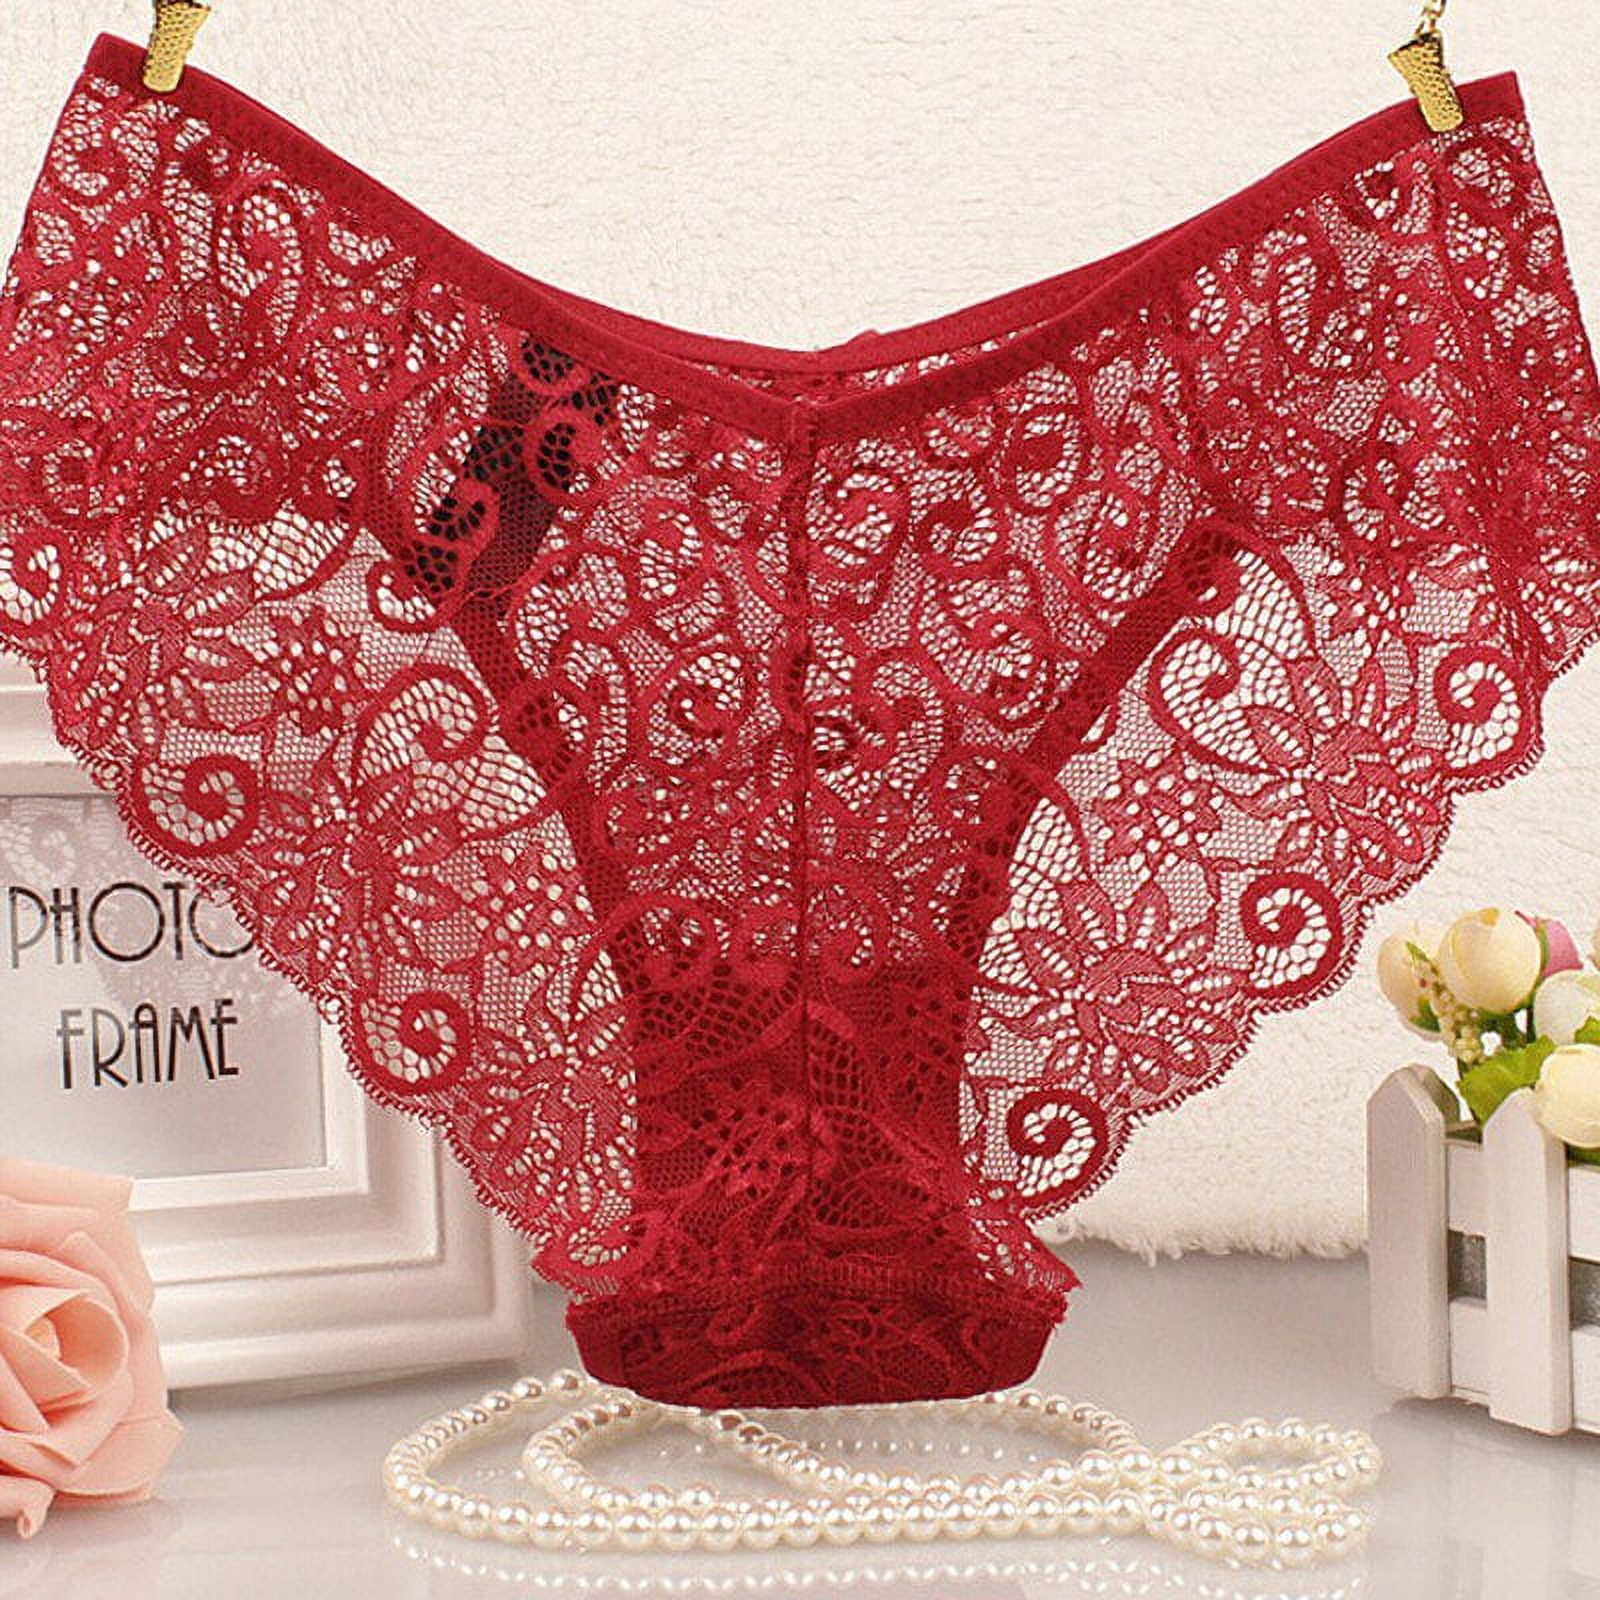 ikasus 5Pcs Women's Sexy Lace Knickers See Through Underwear High